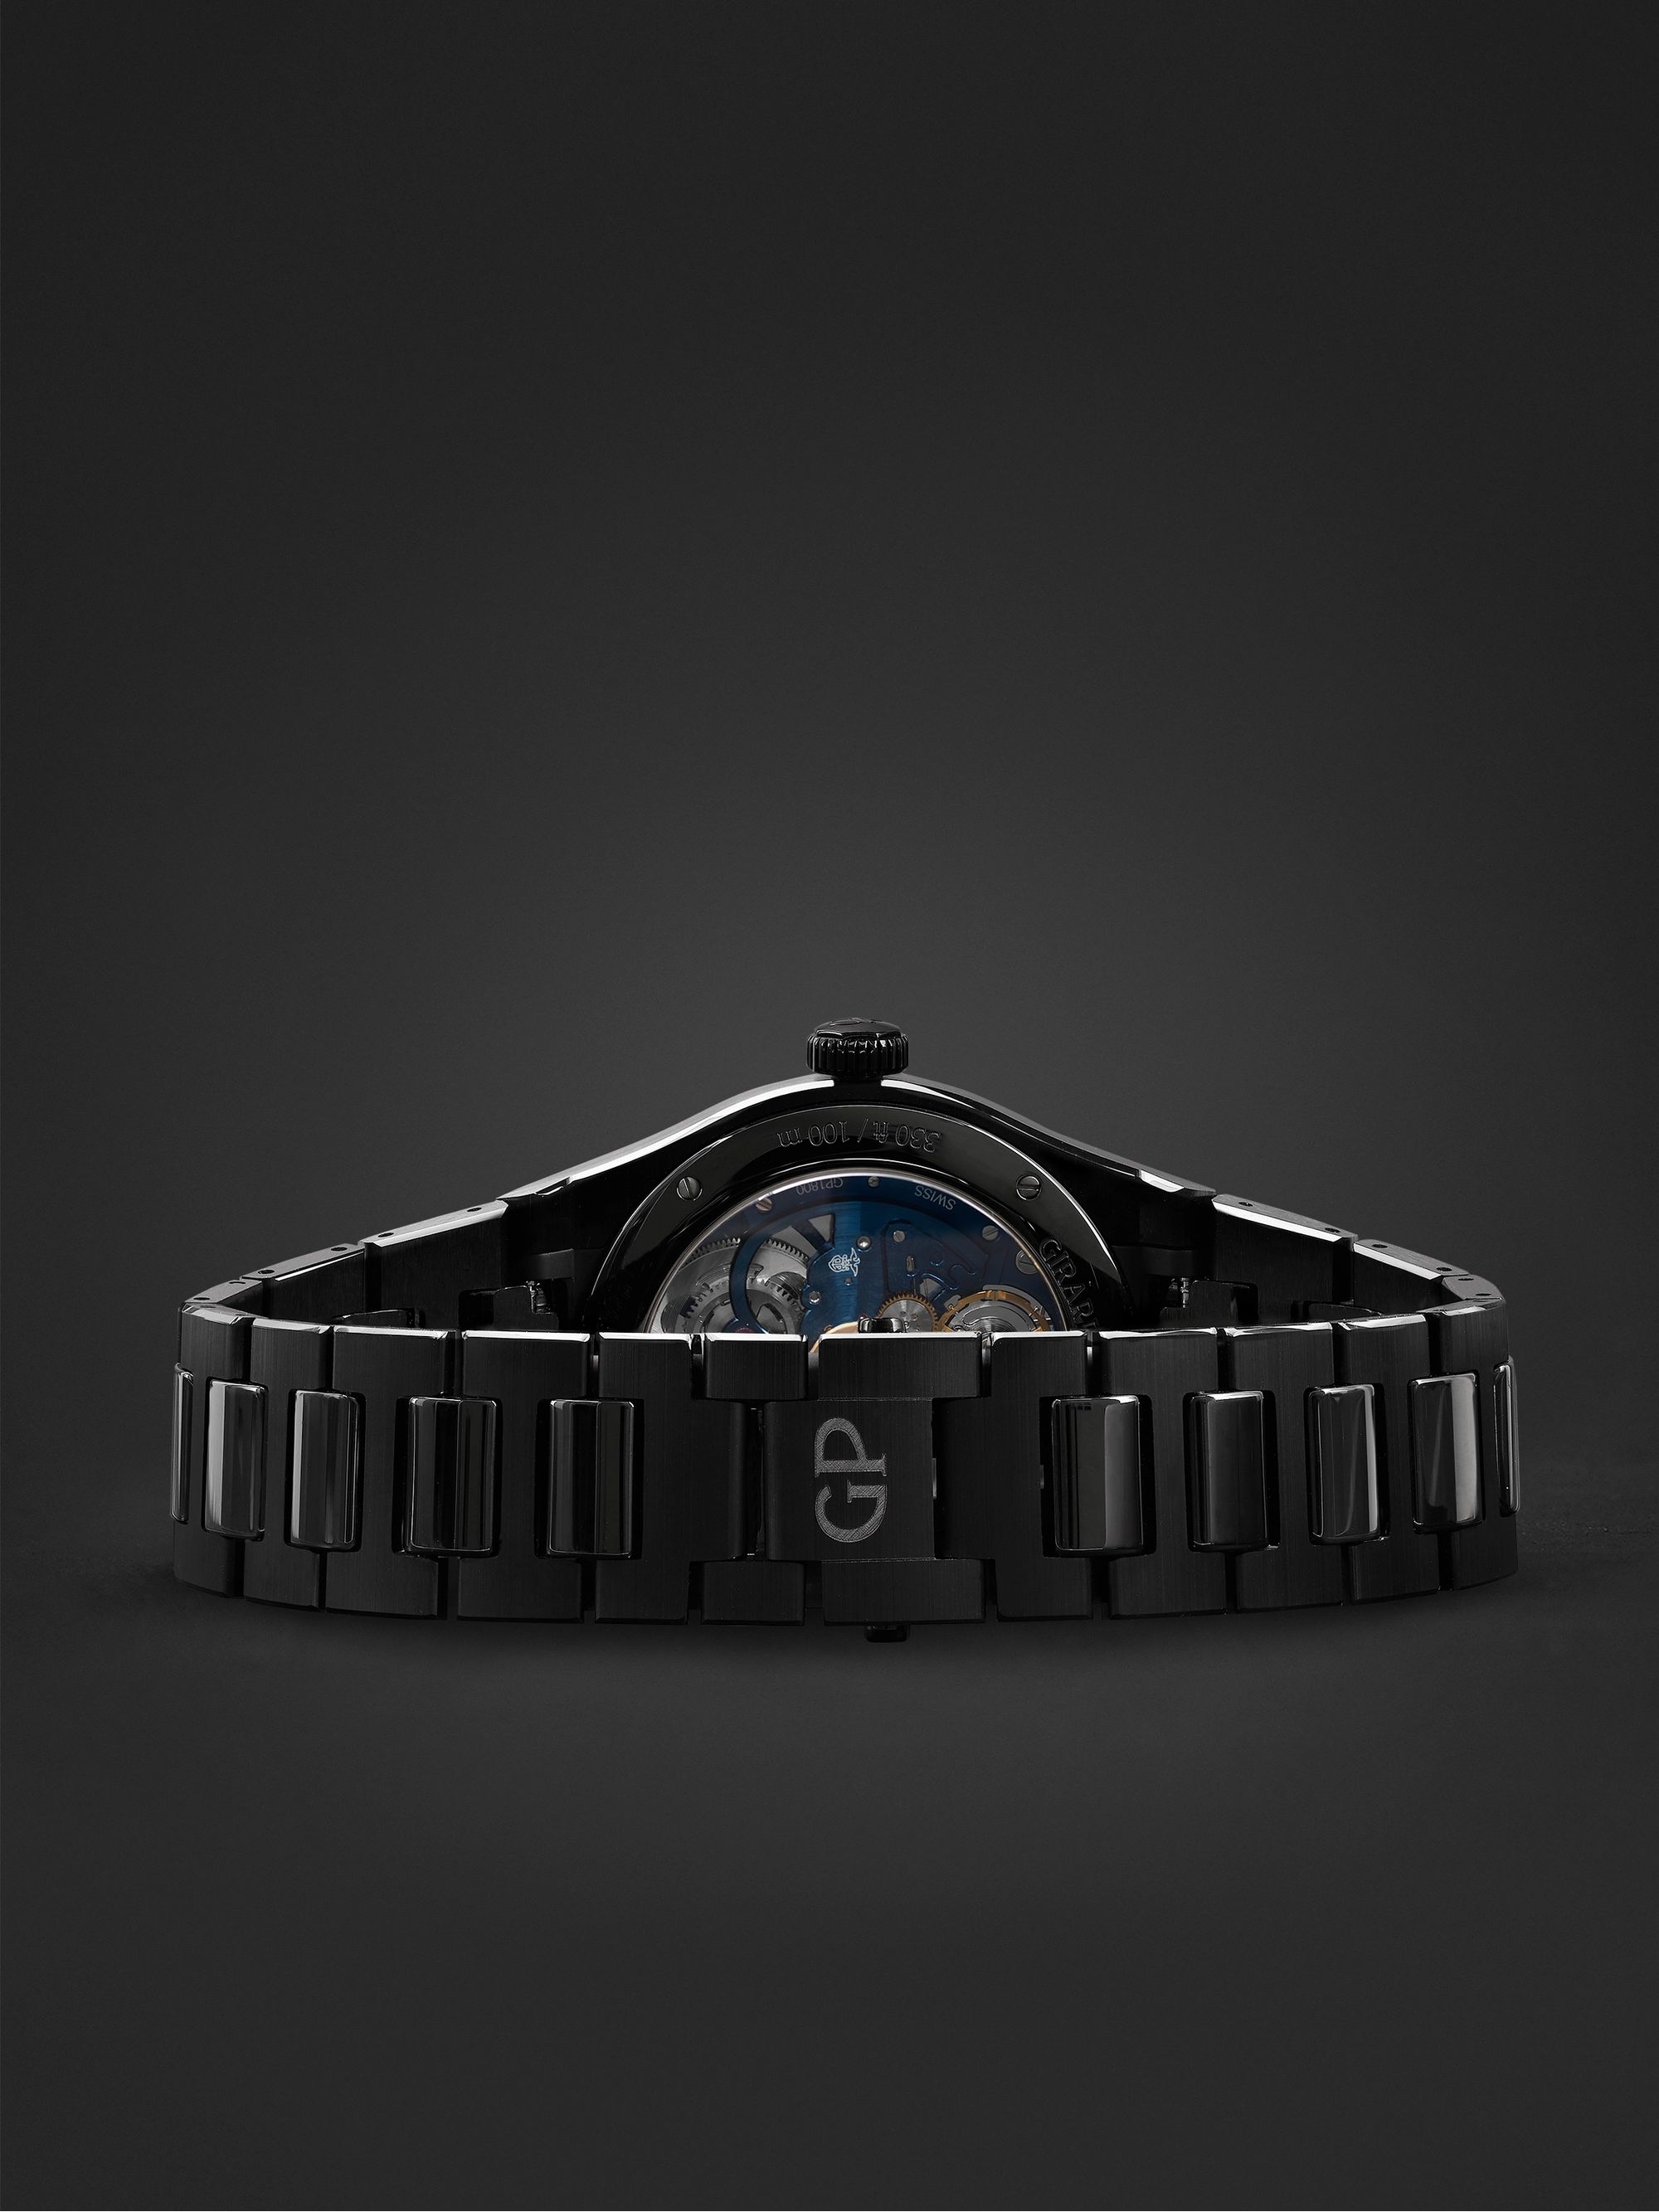 GIRARD-PERREGAUX Laureato Earth To Sky Automatic Skeleton 42mm Ceramic Watch, Ref. No. 81015-32-432-32A